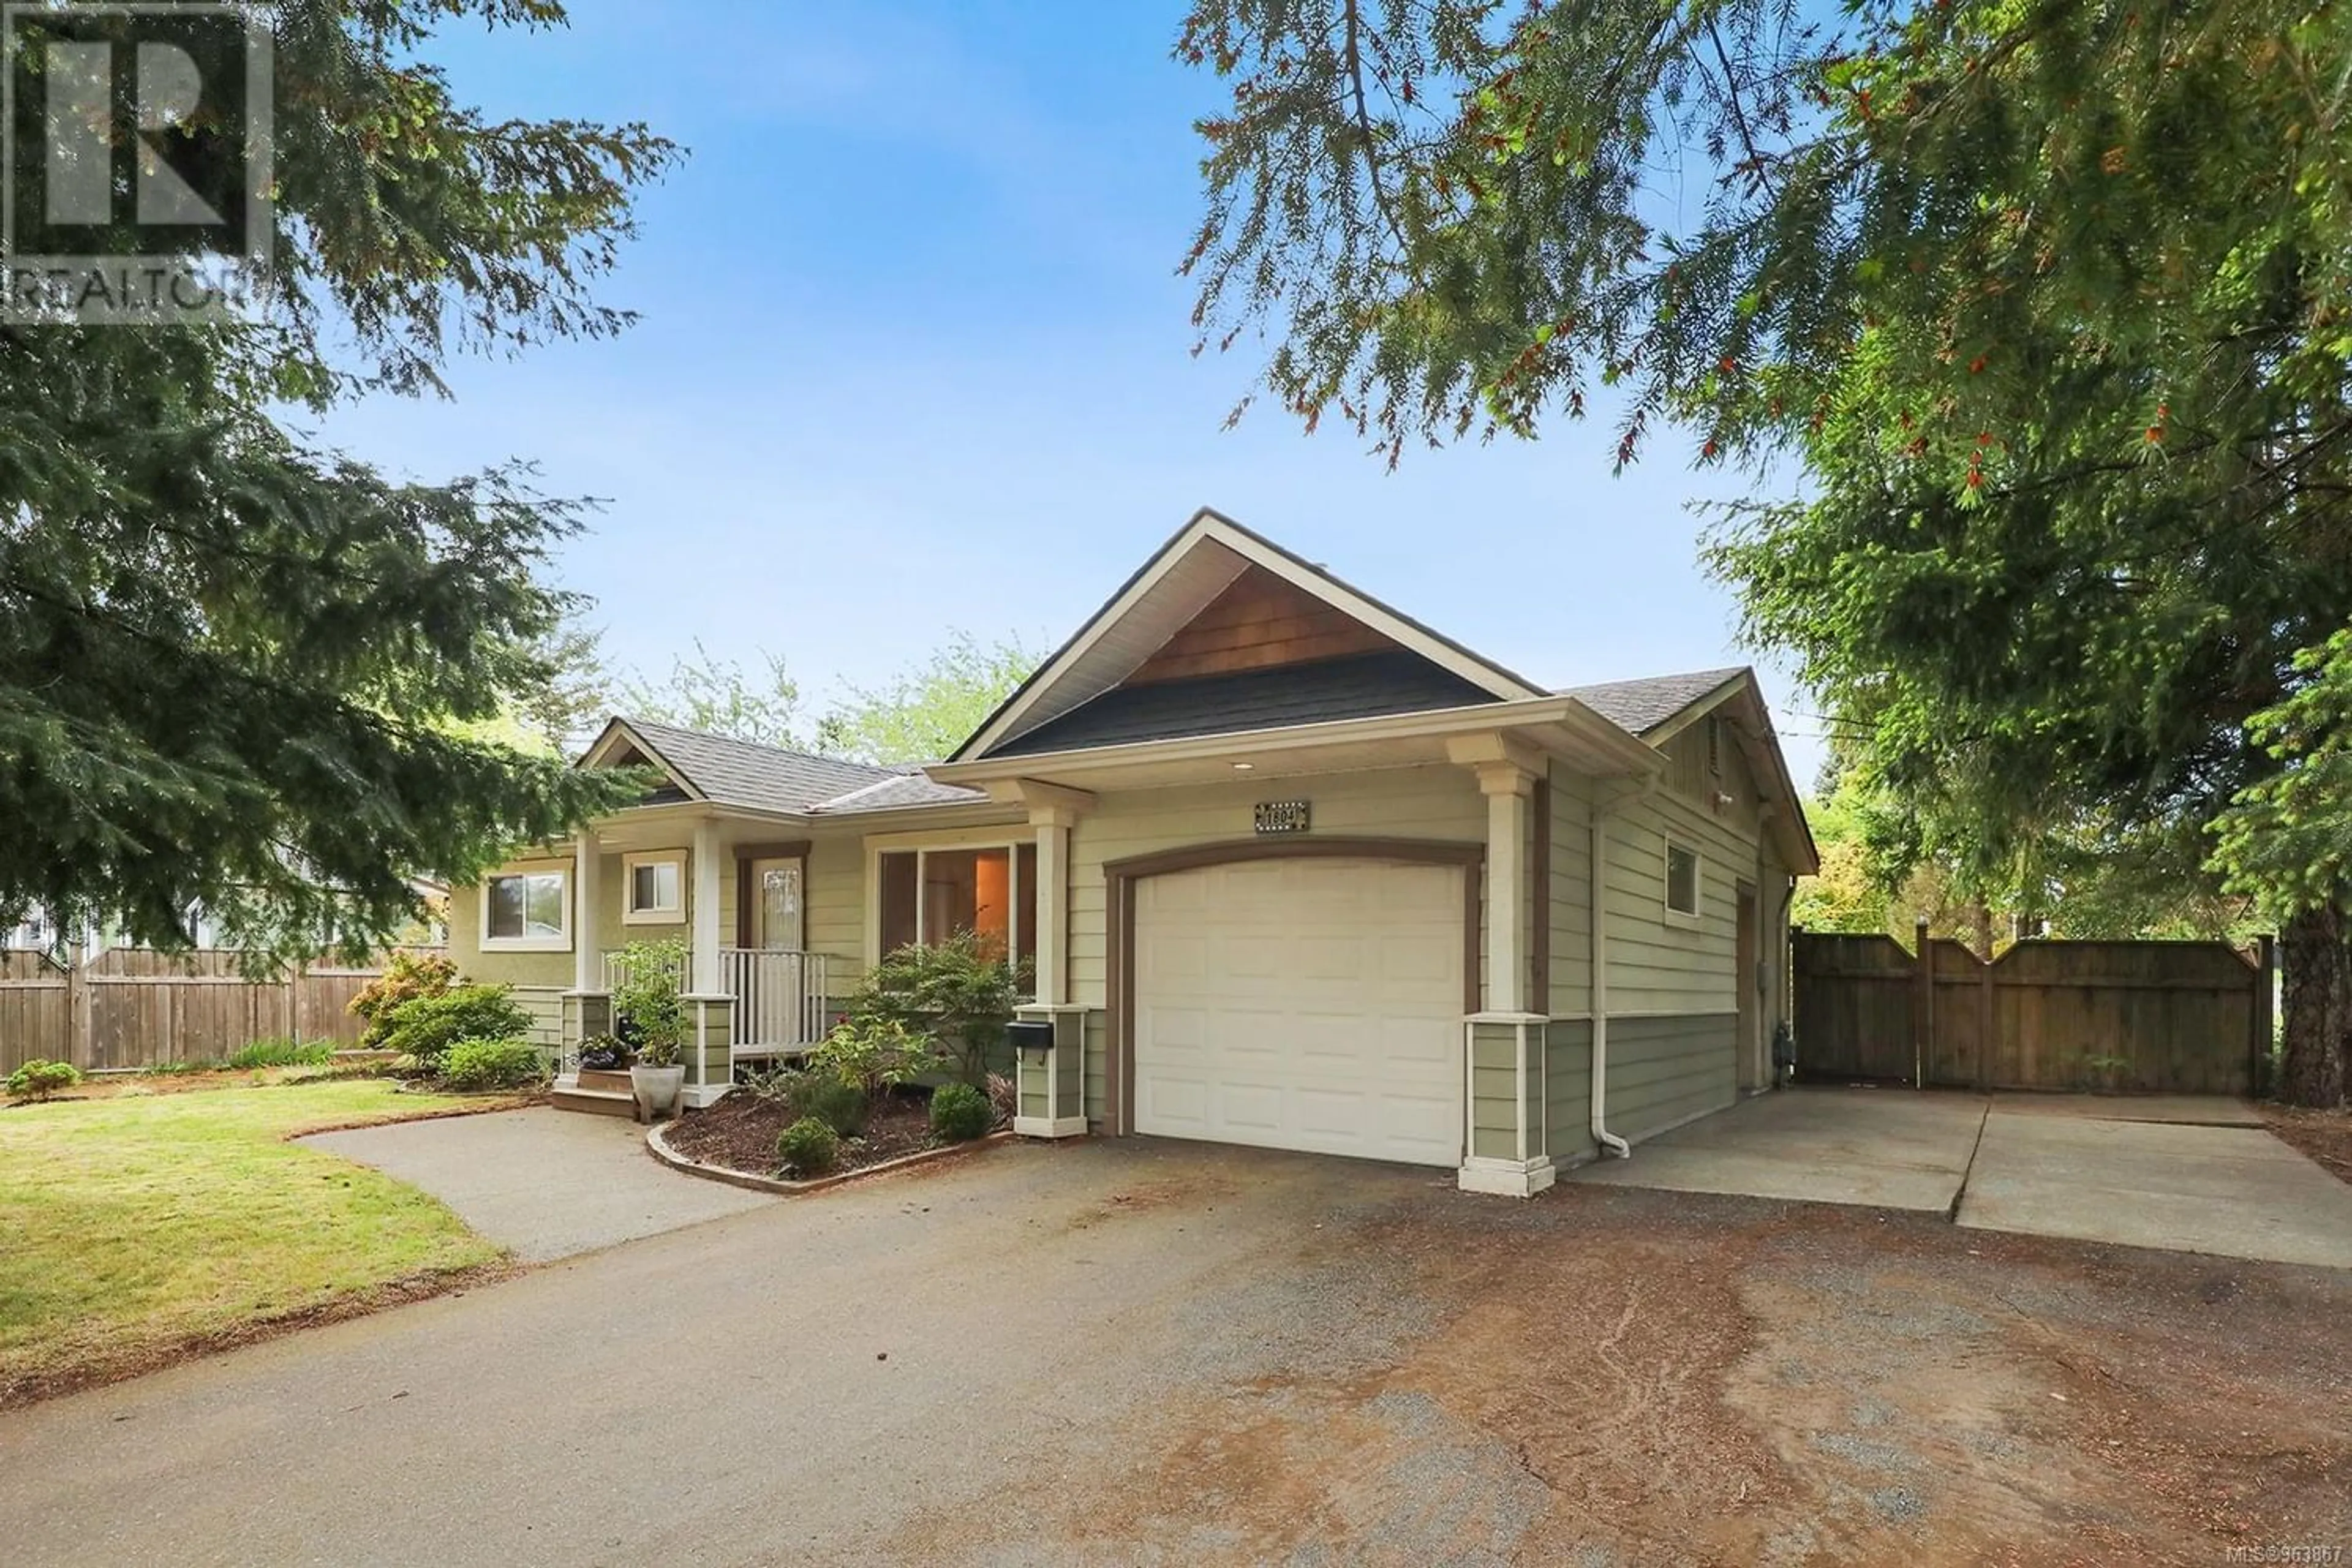 Frontside or backside of a home for 1804 Robb Ave, Comox British Columbia V9M2E4